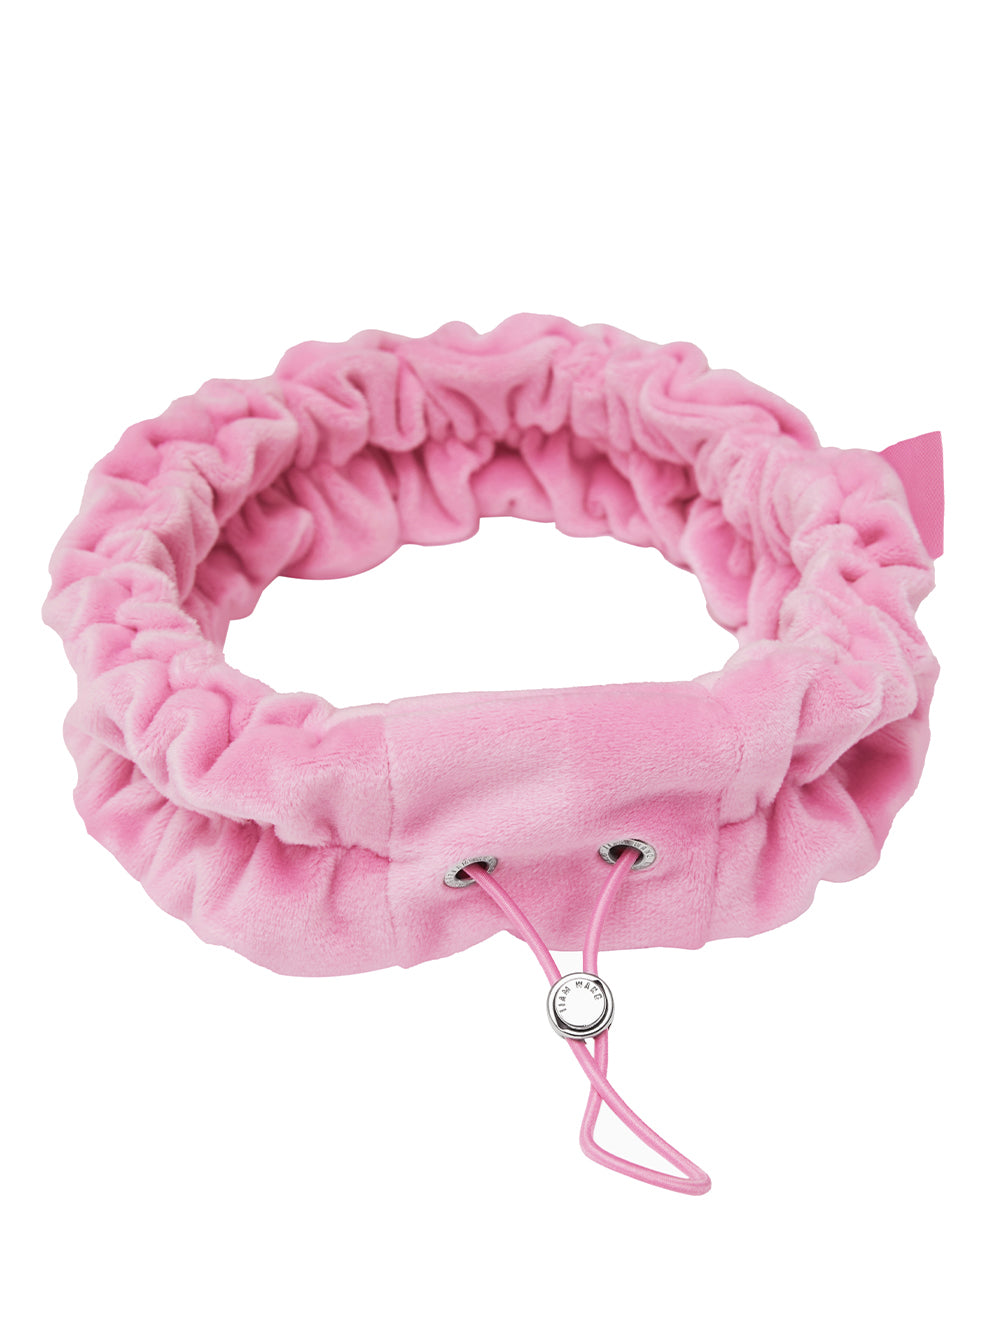 STAY FOR THE NIGHT SPA HEADBAND (PINK)